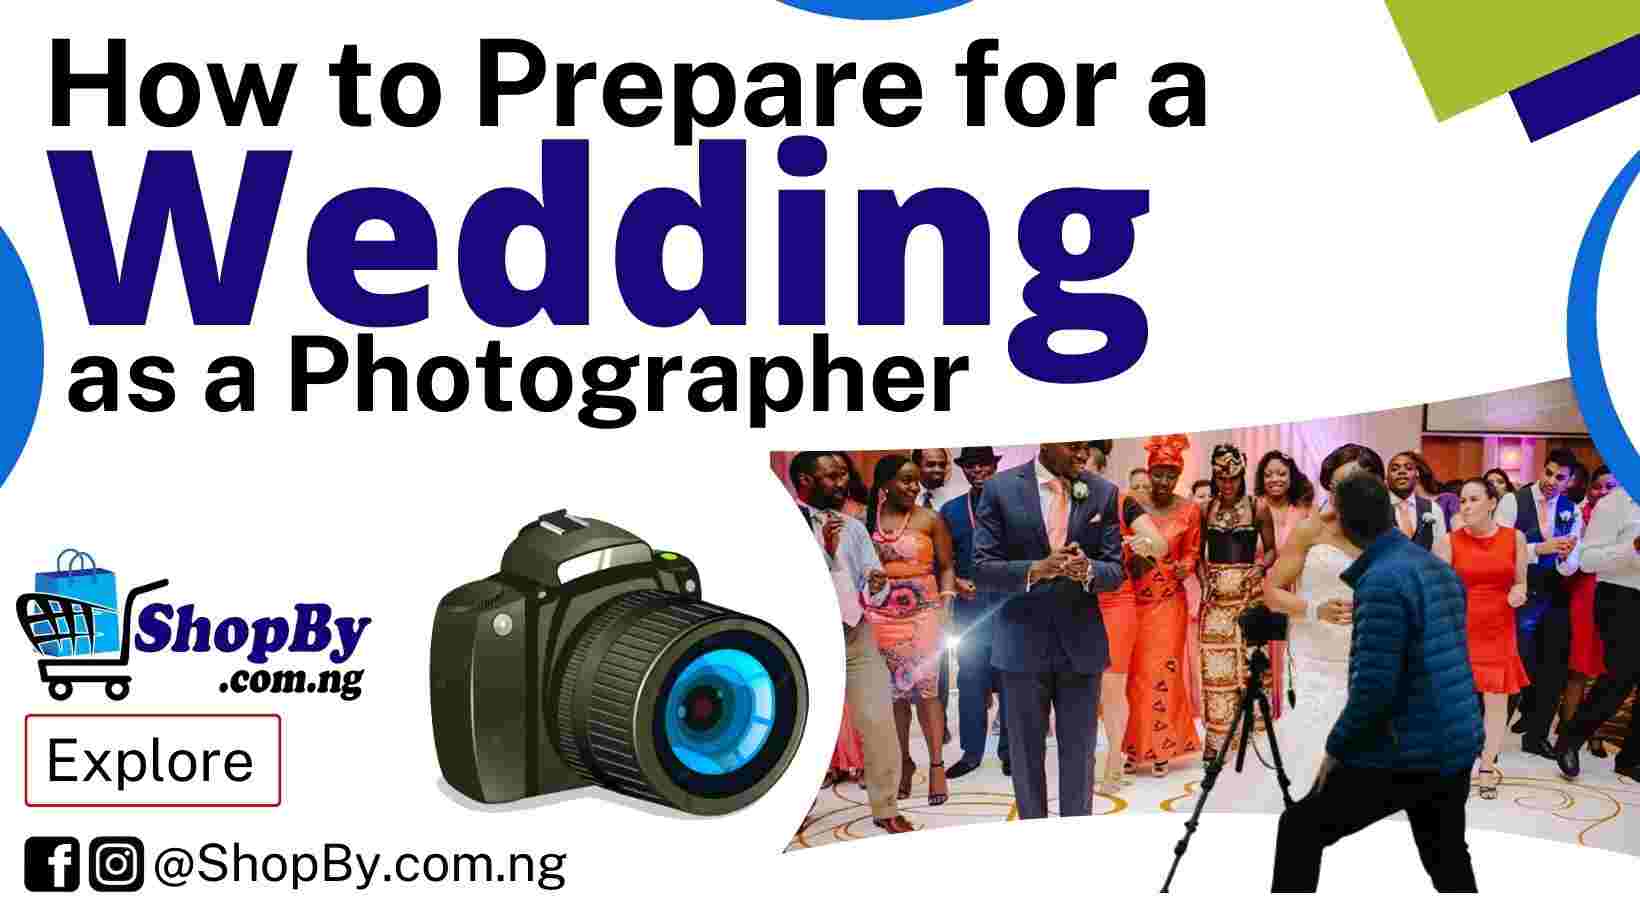 How to Prepare for a Wedding as a Photographer